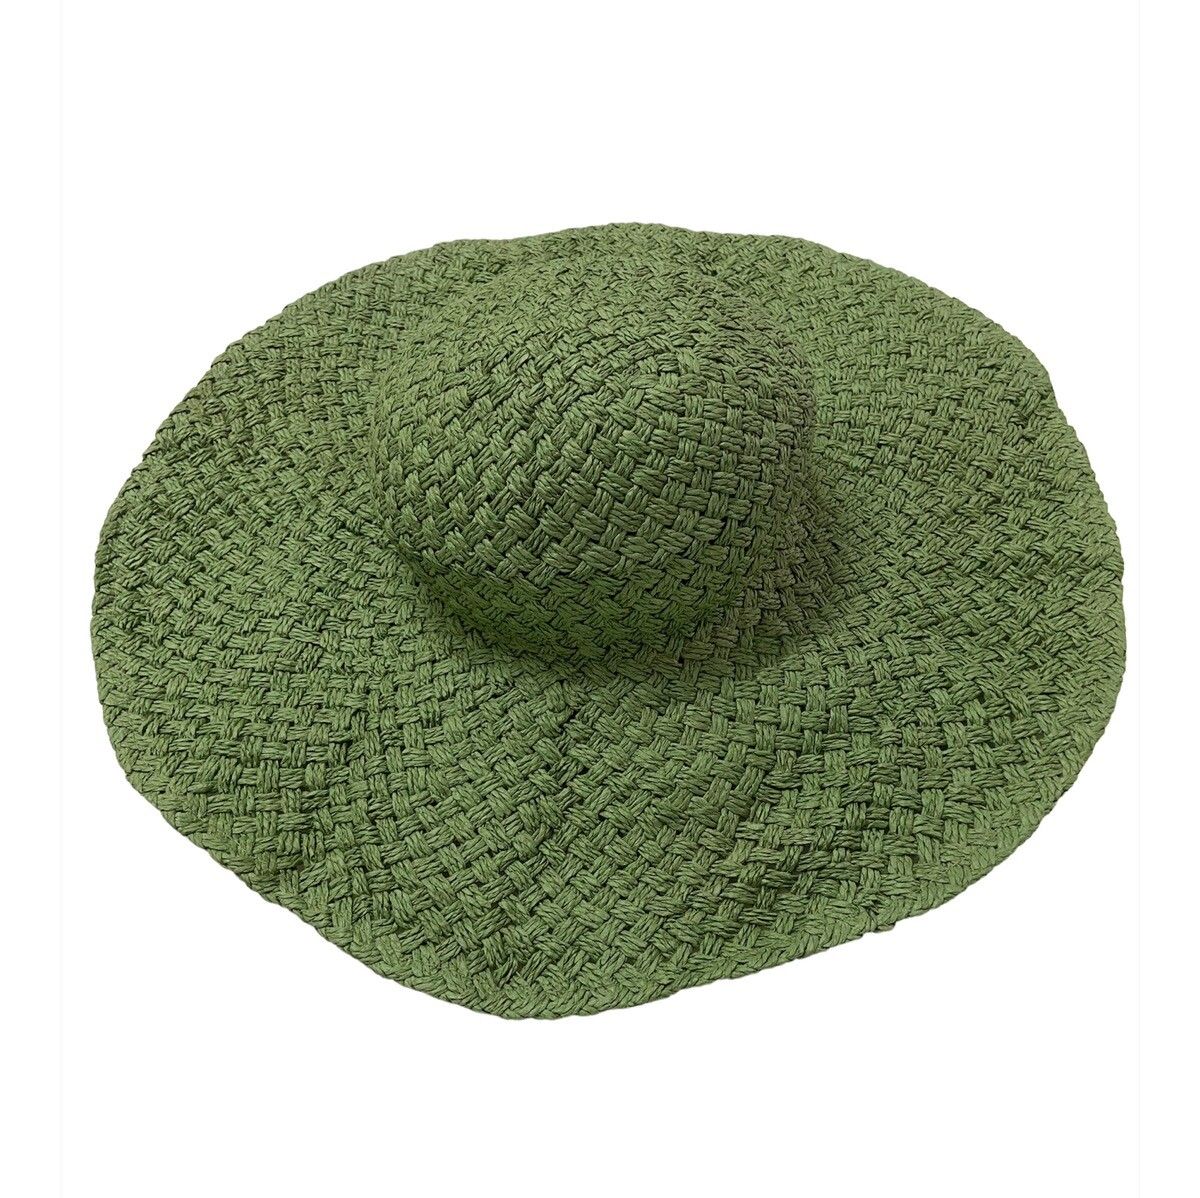 United Colors of Benetton Beach Hat - 1